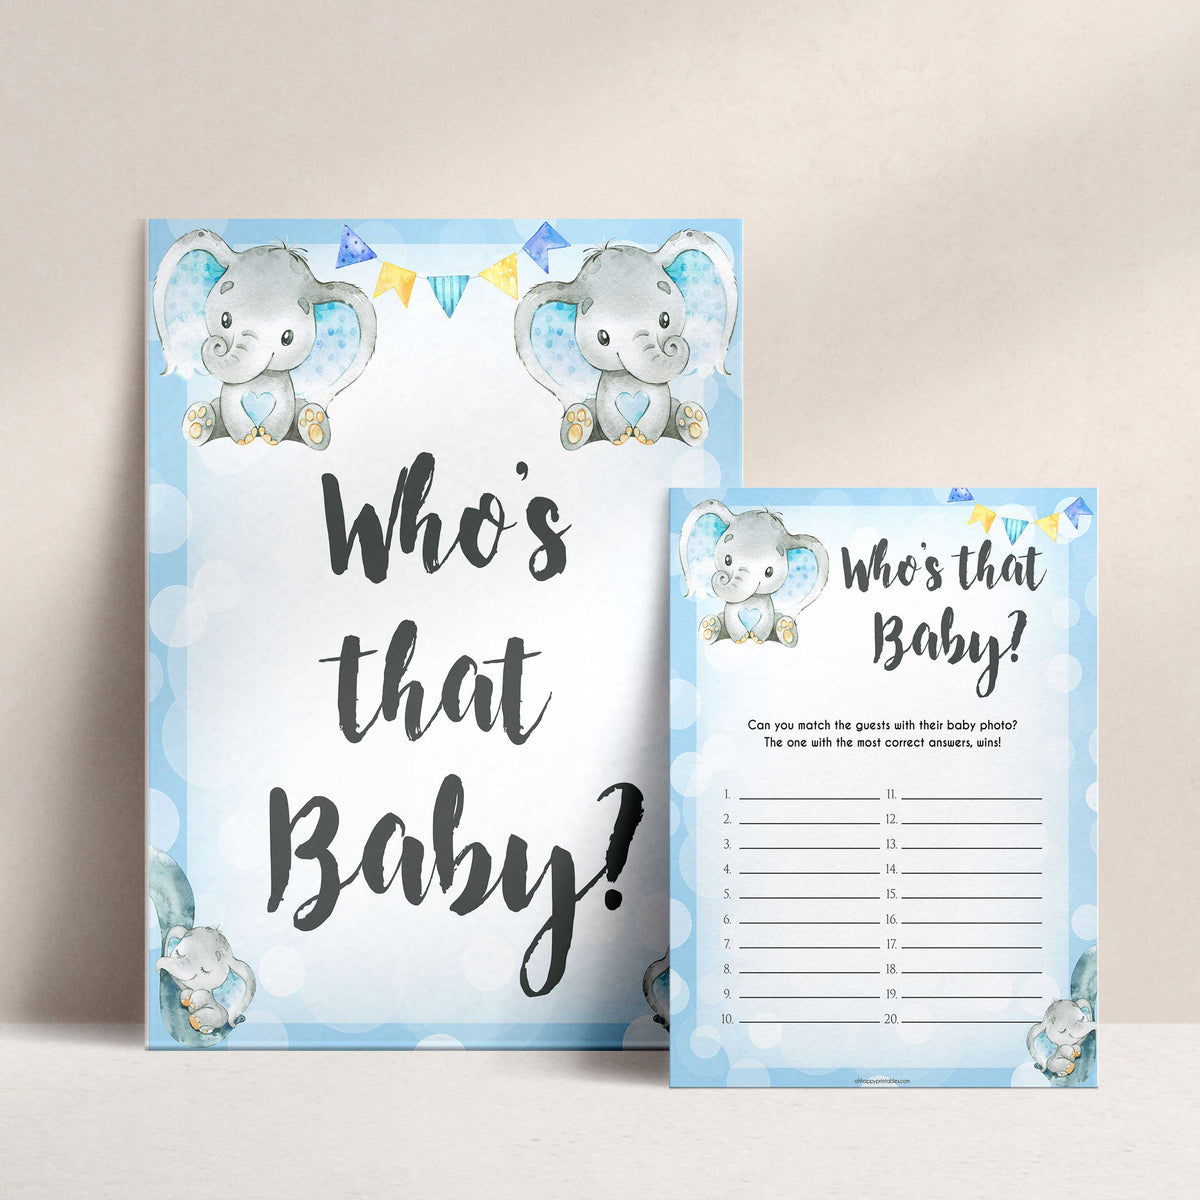 whos that baby game, guess the baby picture game, Printable baby shower games, fun baby games, baby shower games, fun baby shower ideas, top baby shower ideas, blue elephant baby shower, blue baby shower ideas